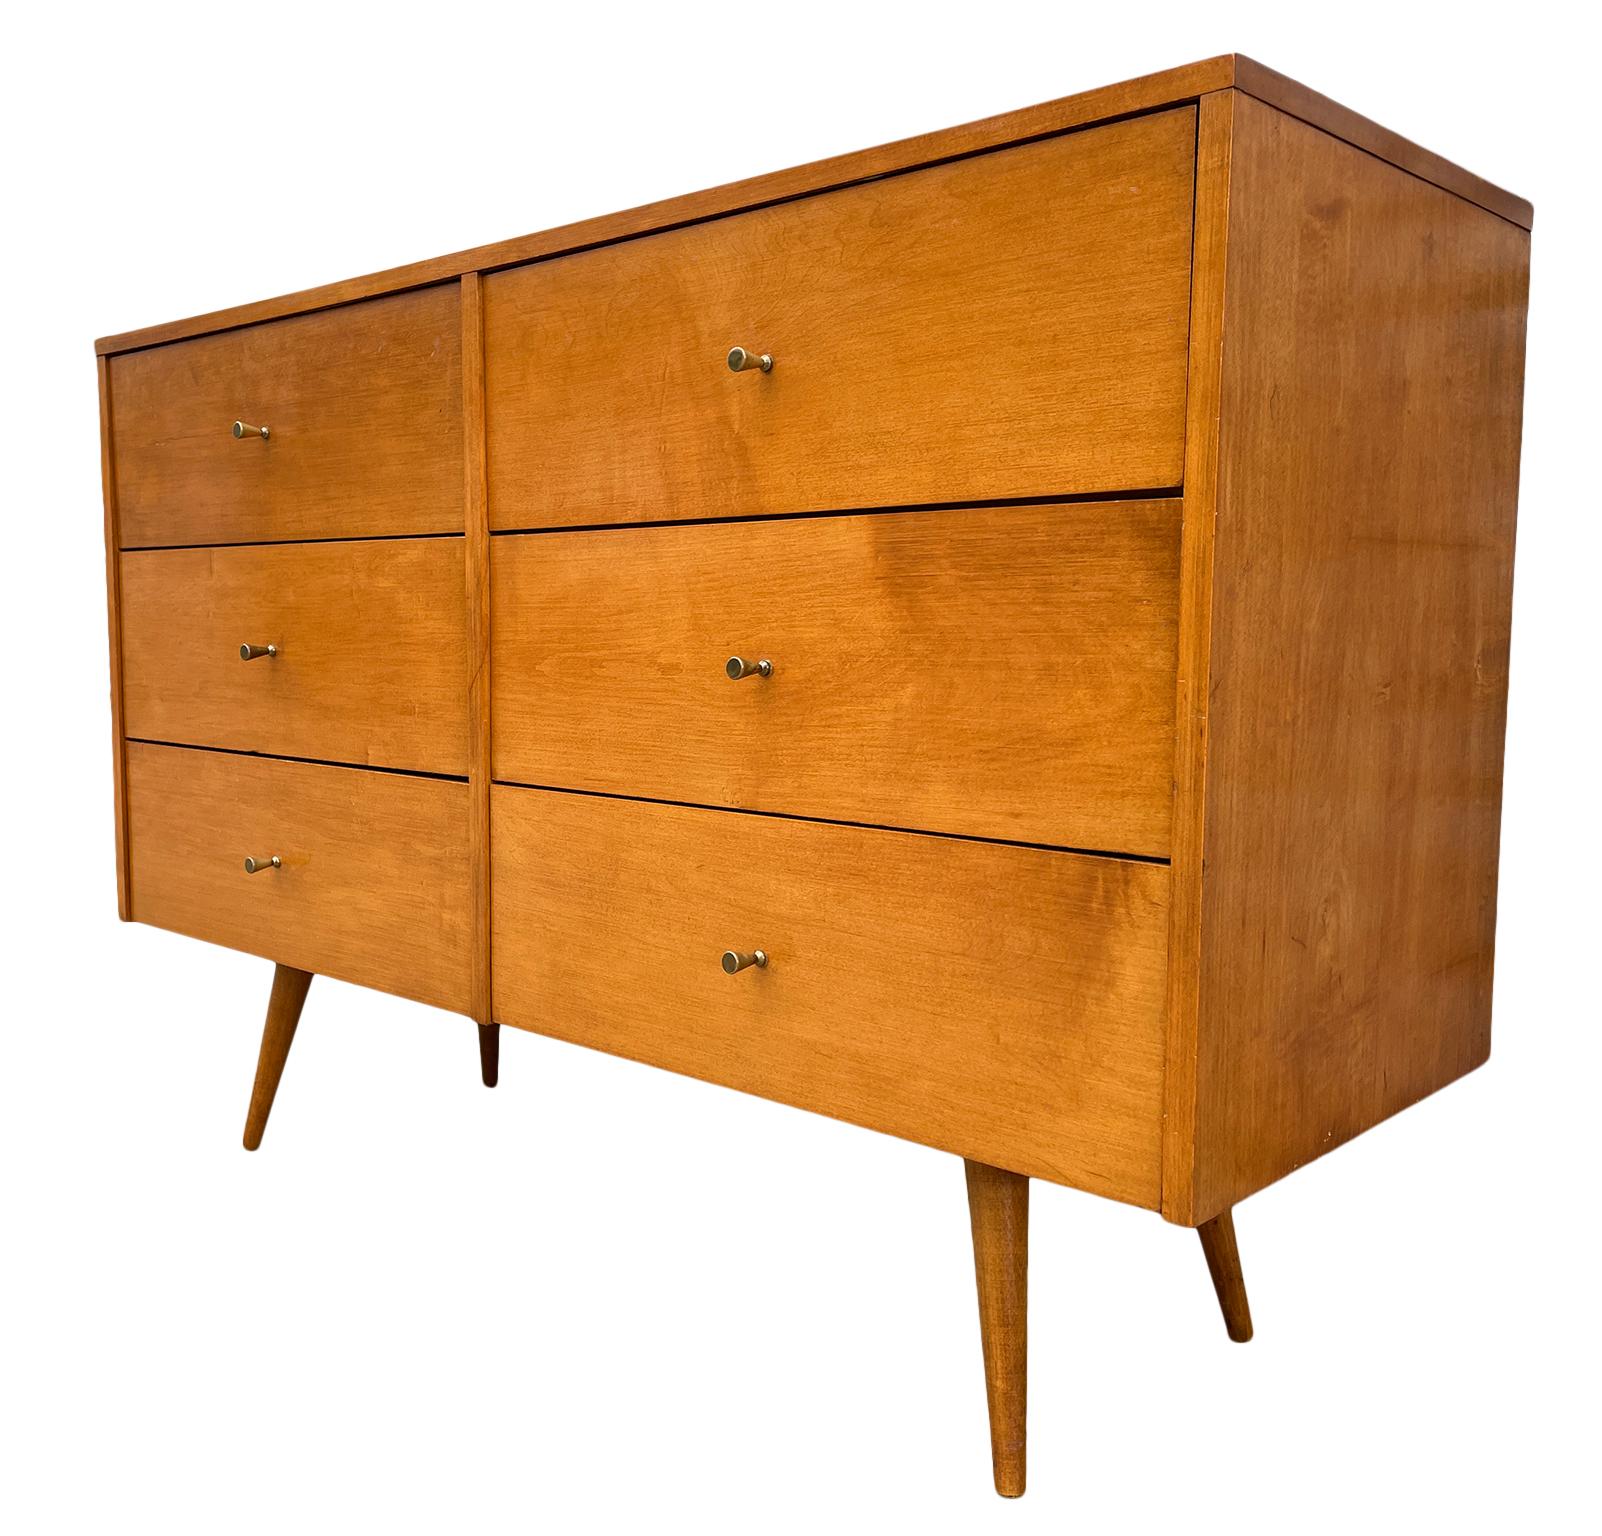 Midcentury Paul McCobb Six-Drawer Dresser Credenza #1509 Blonde Maple Brass In Good Condition For Sale In BROOKLYN, NY